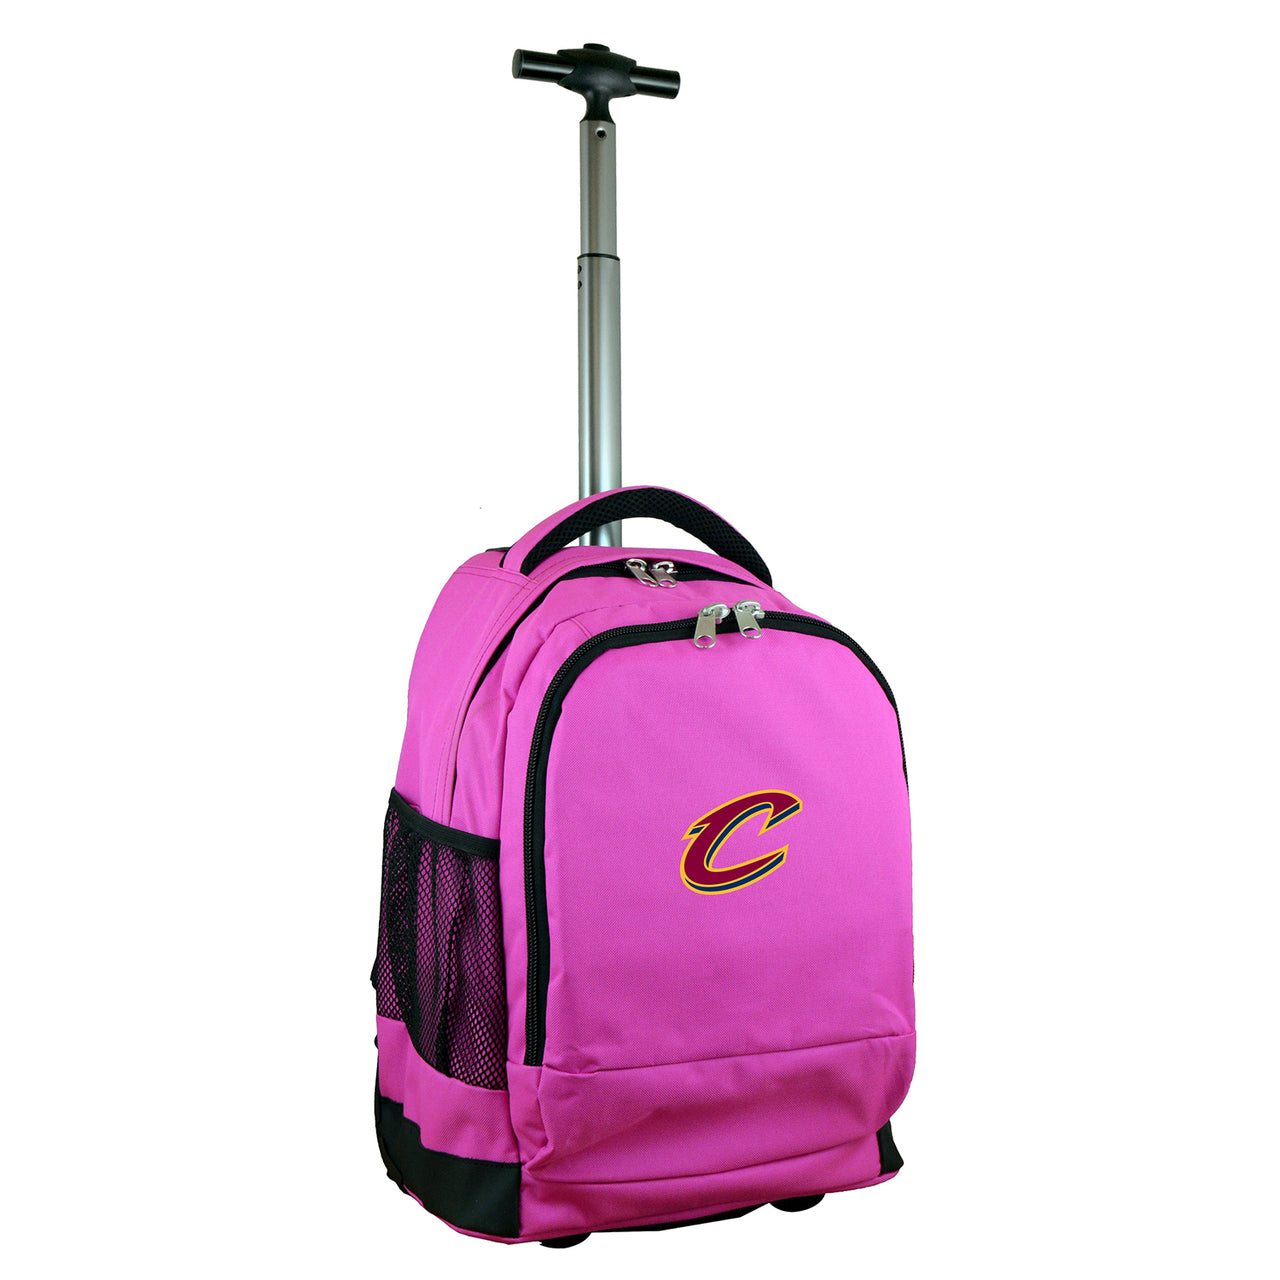 Cleveland Cavaliers Premium Wheeled Backpack in Pink